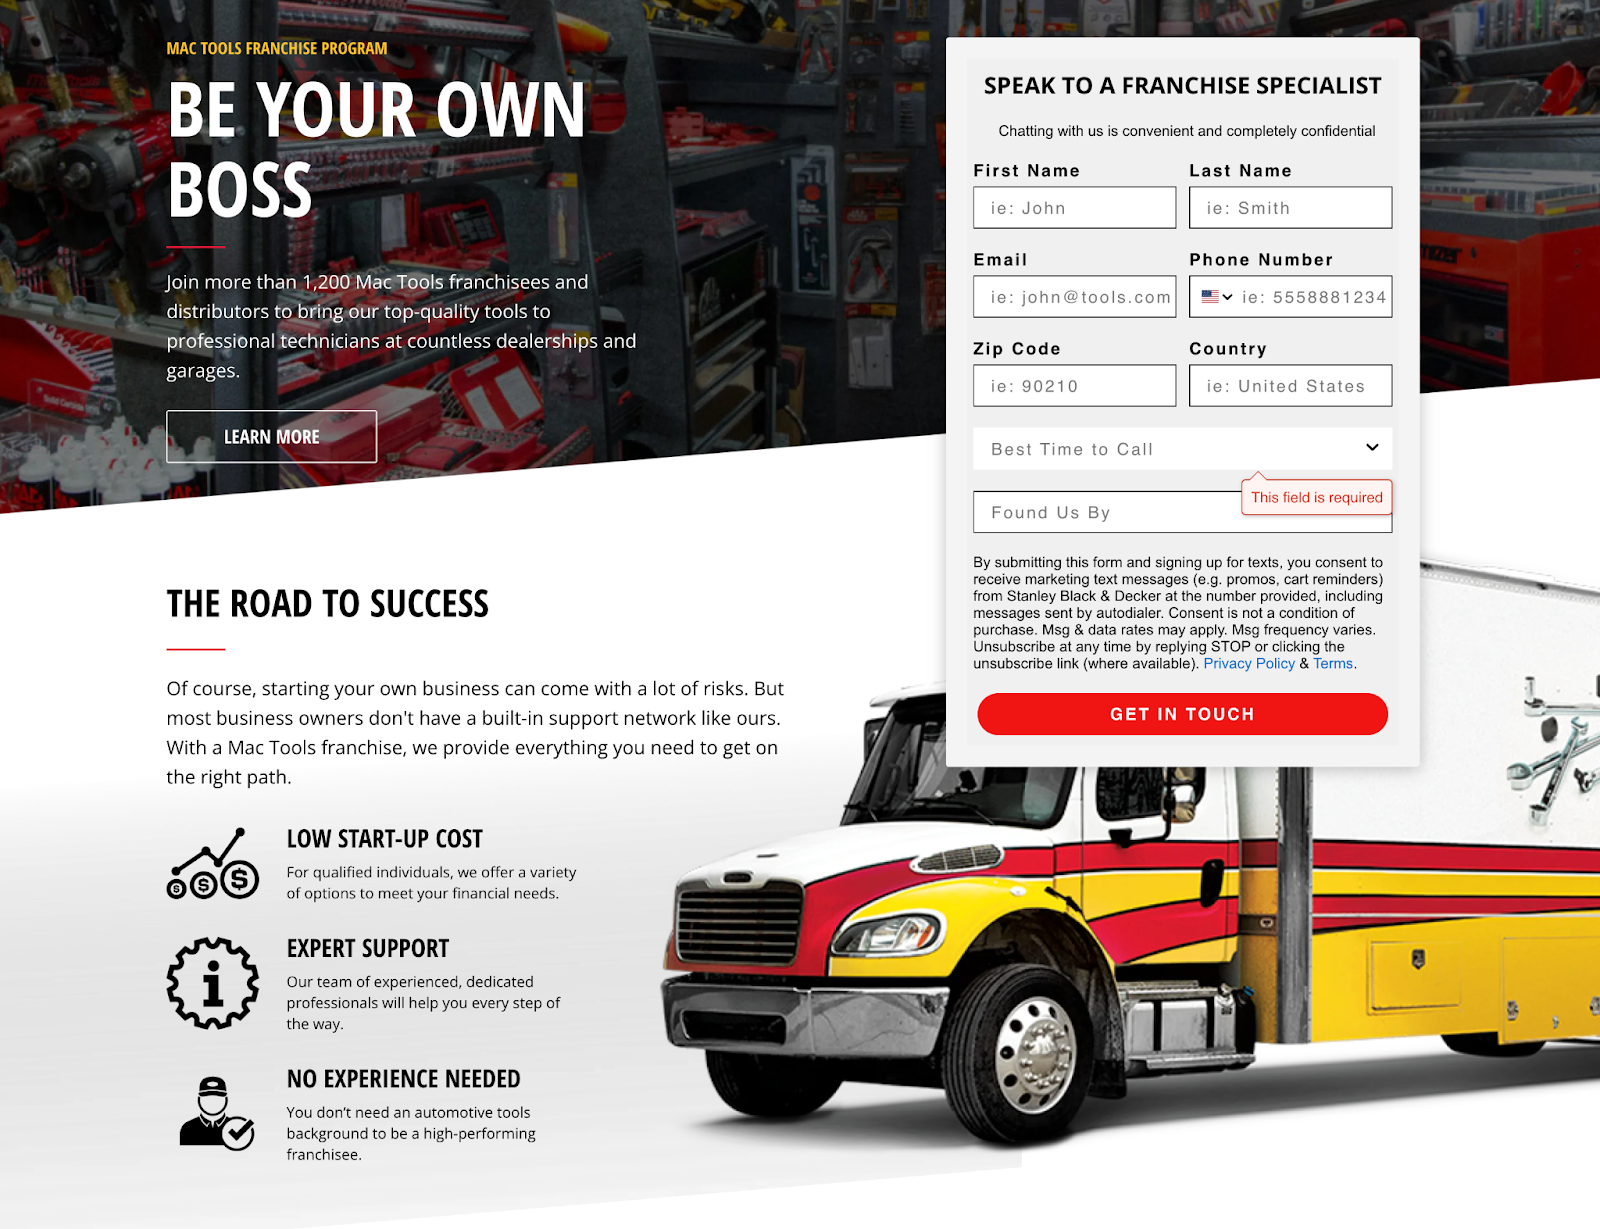 The Mac Tools franchise program page with a “Be your own boss” title and a form to sign up on the right